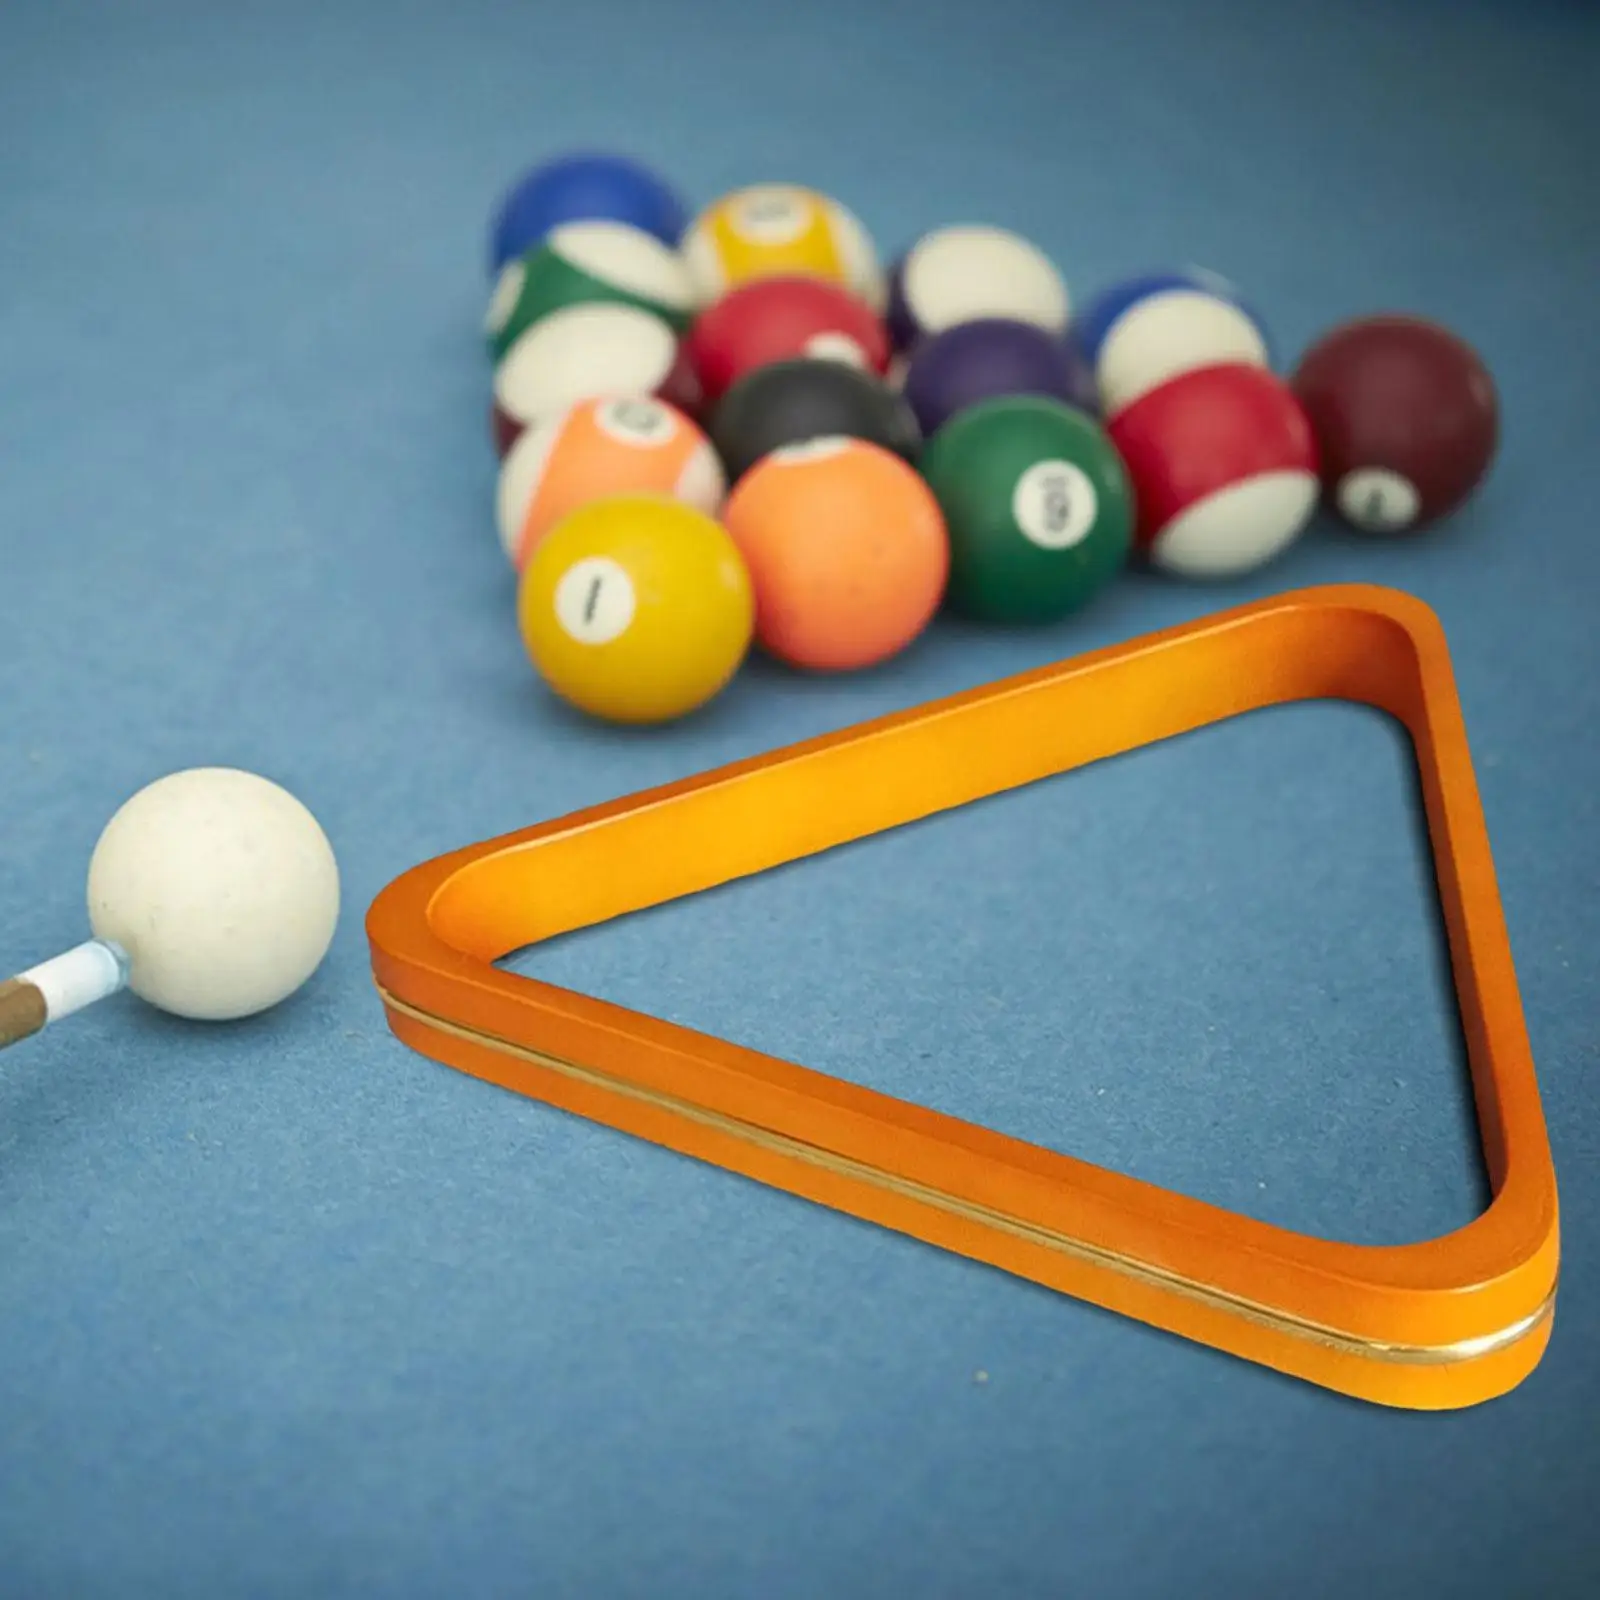 Billiard Triangle Rack Wooden Home Snooker Tight Rack Pool Table Ball Holder